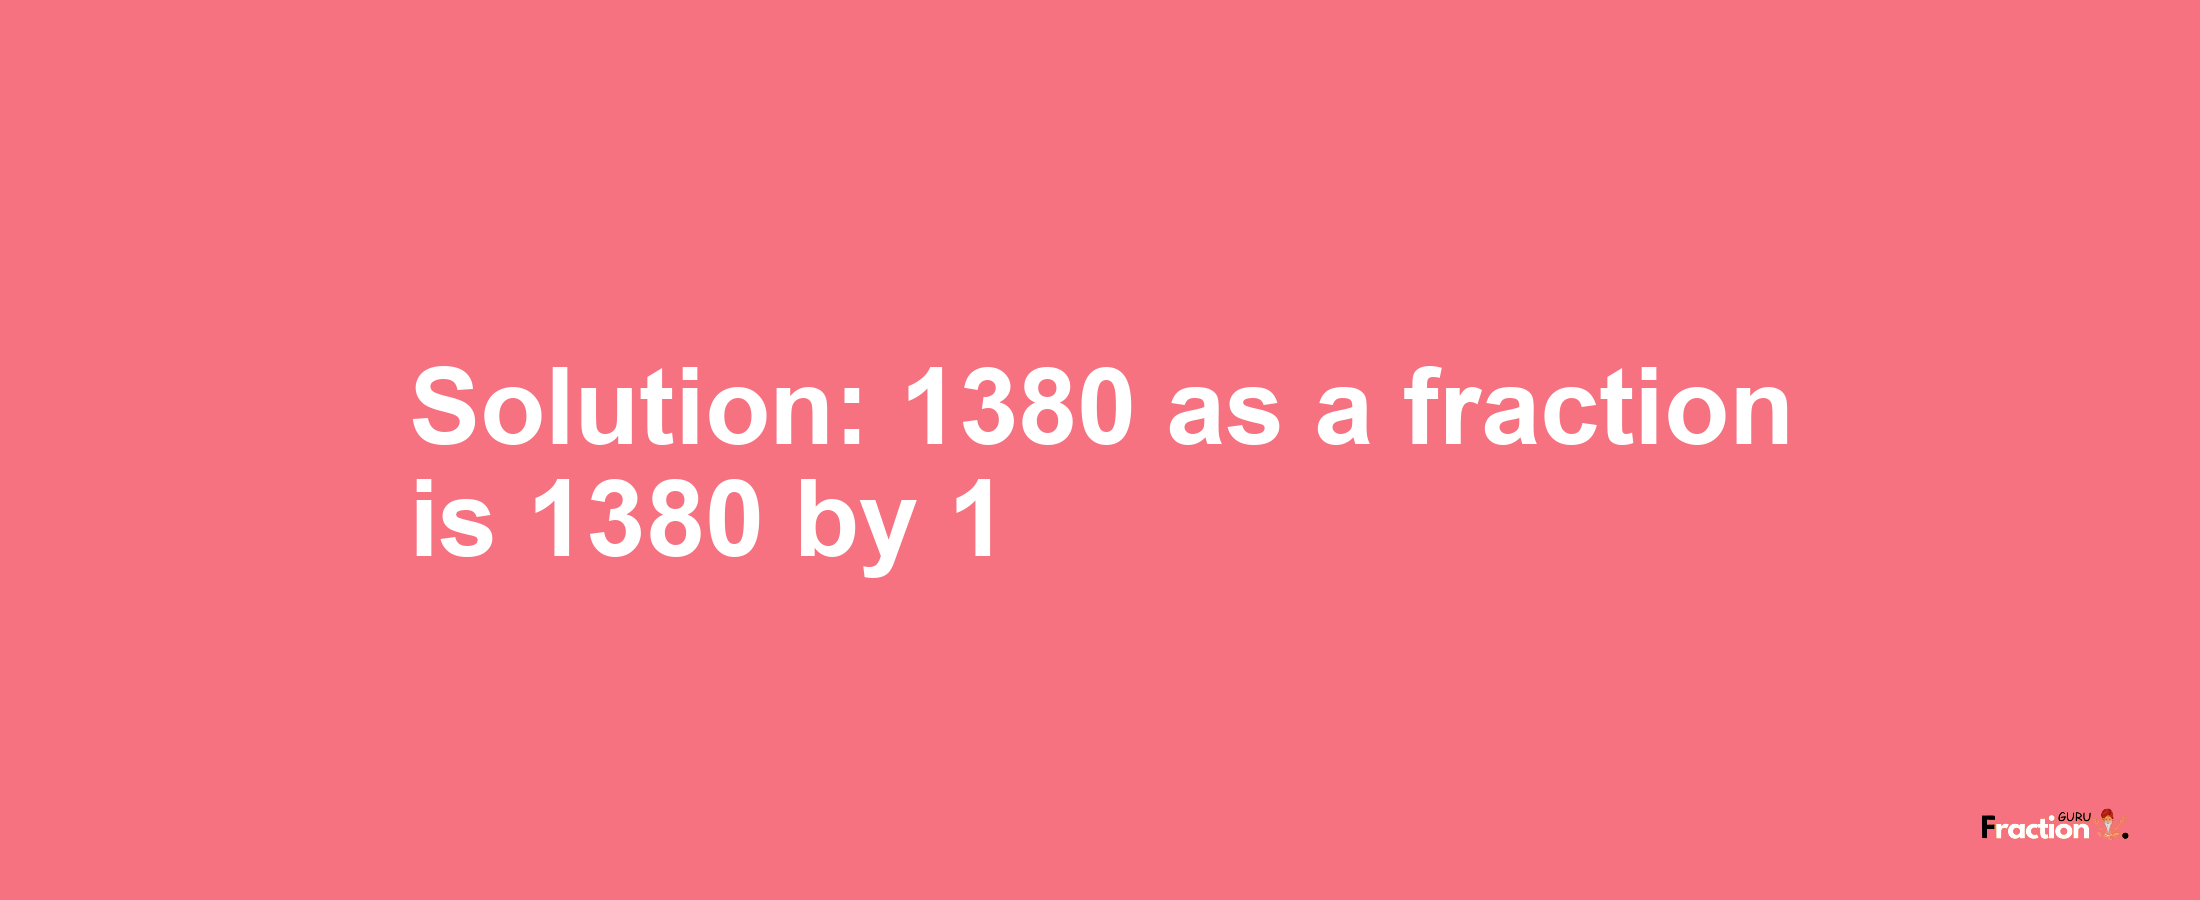 Solution:1380 as a fraction is 1380/1